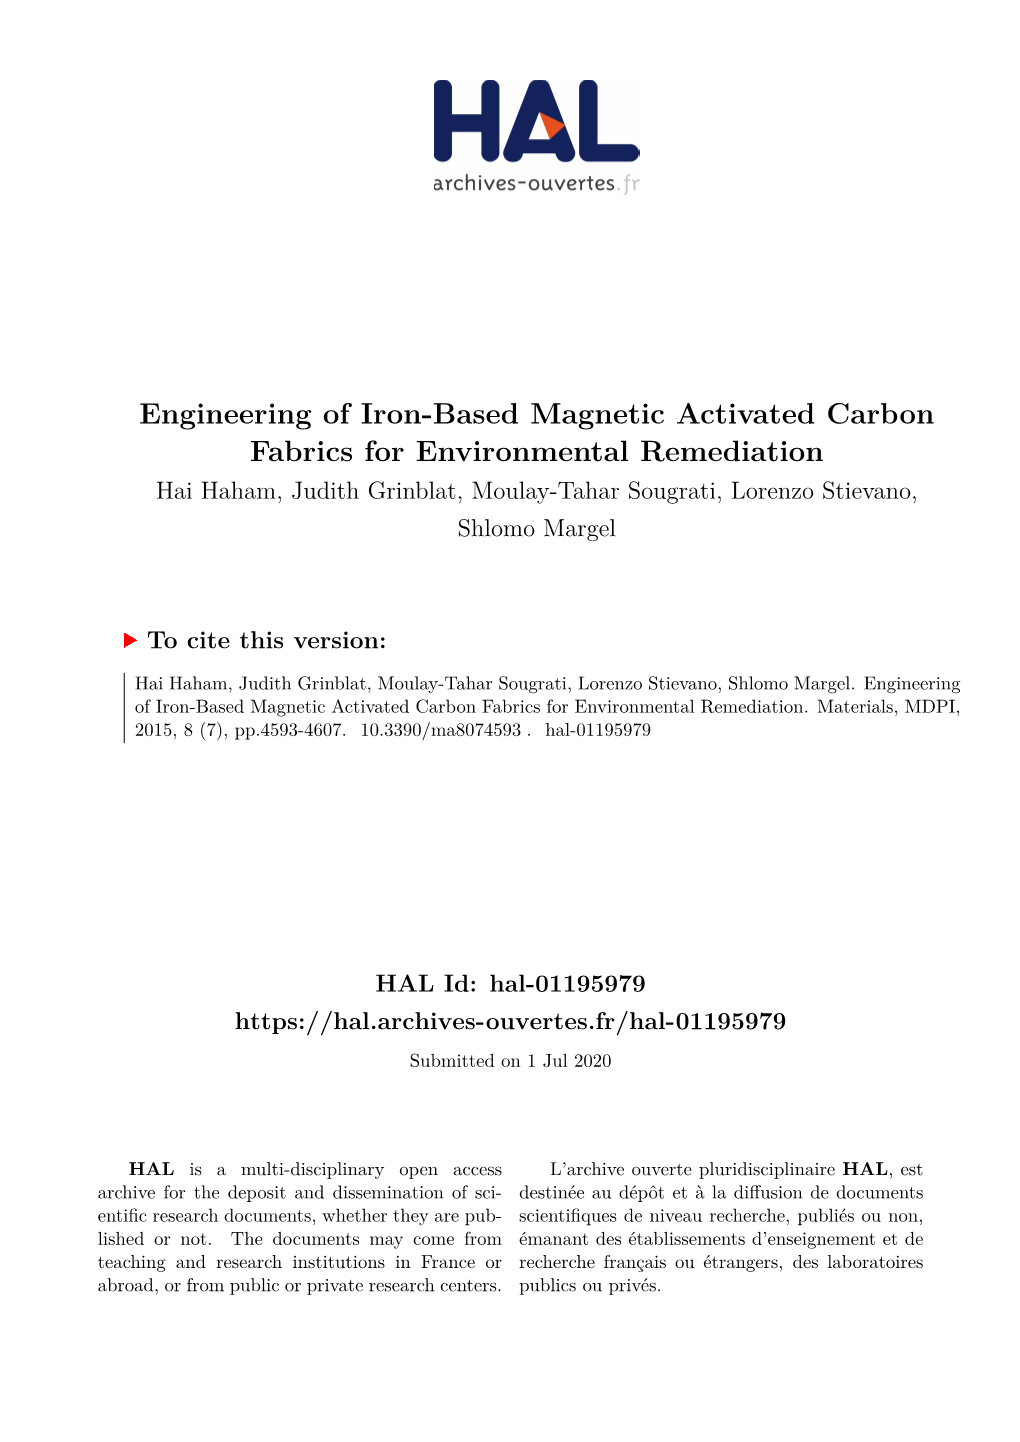 Engineering of Iron-Based Magnetic Activated Carbon Fabrics For